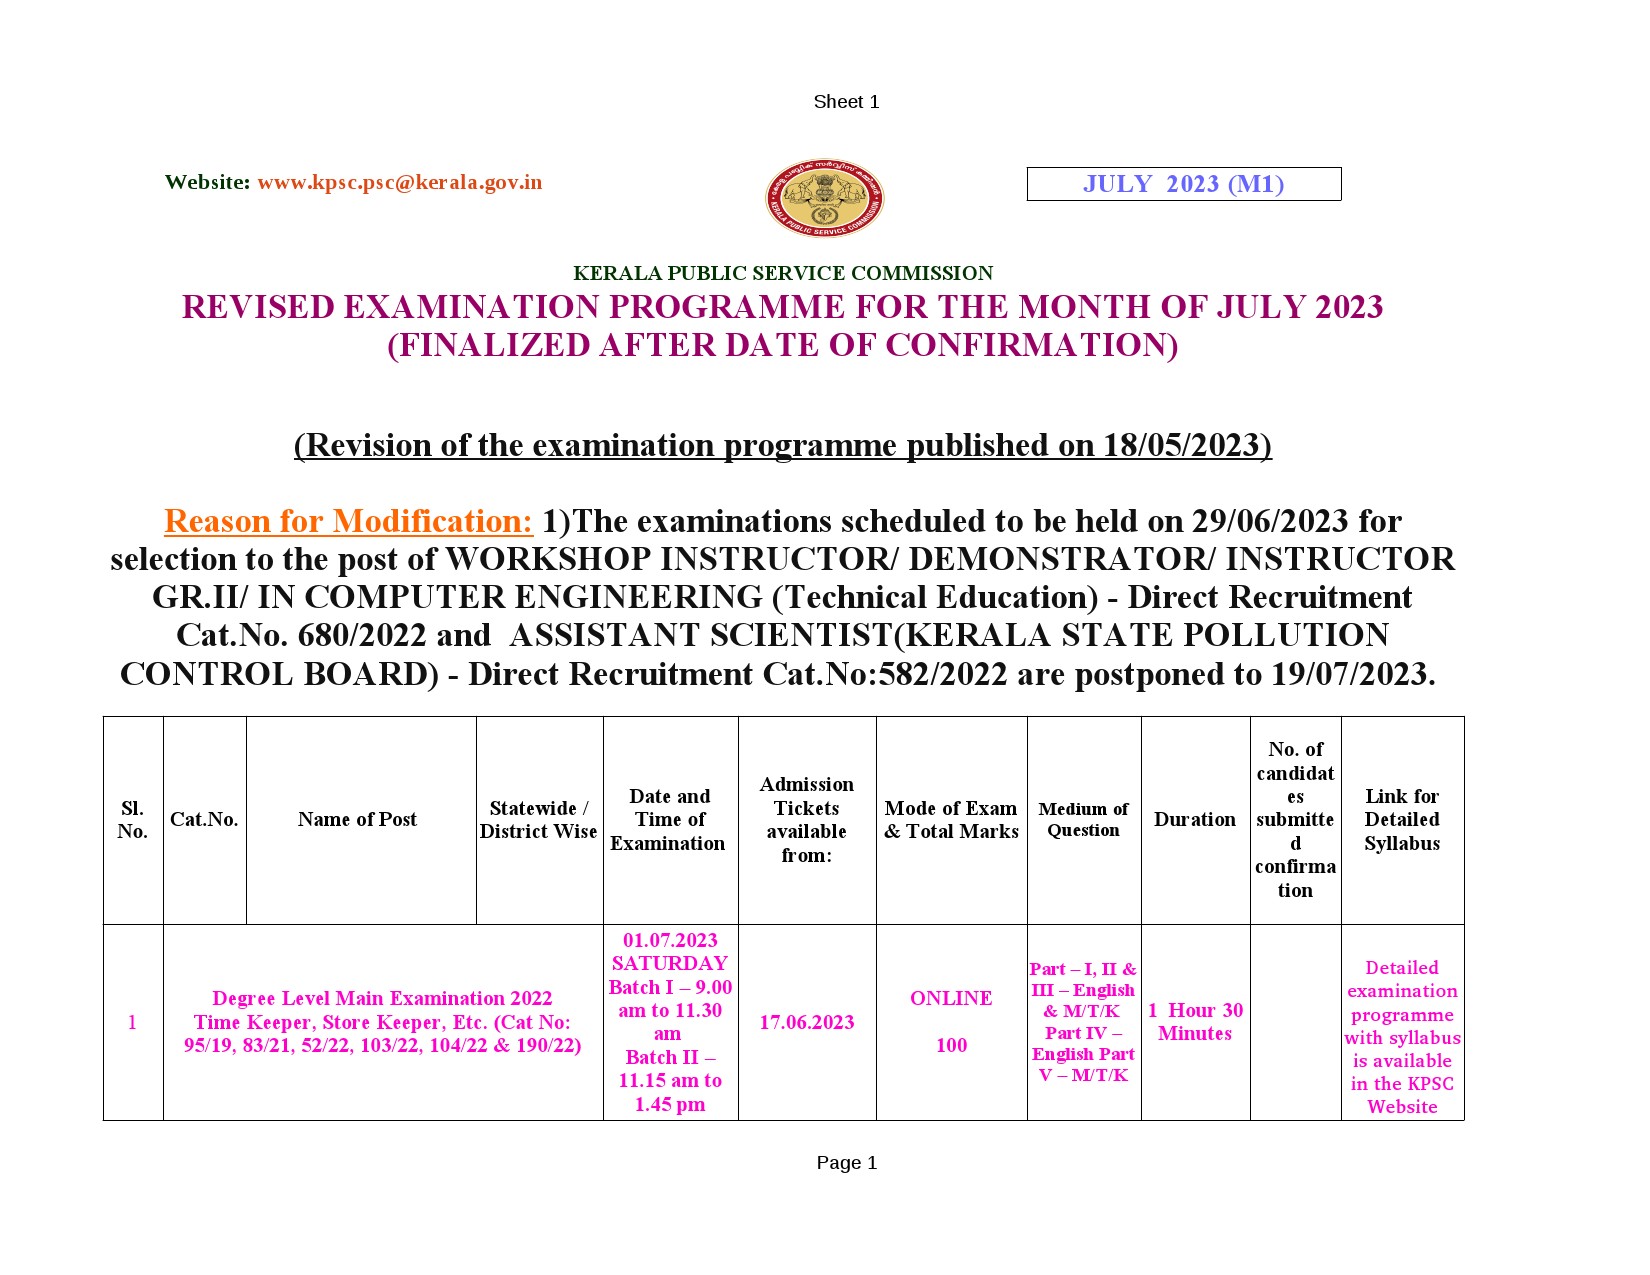 REVISED EXAMINATION PROGRAMME FOR THE MONTH OF JULY 2023 - Notification Image 1